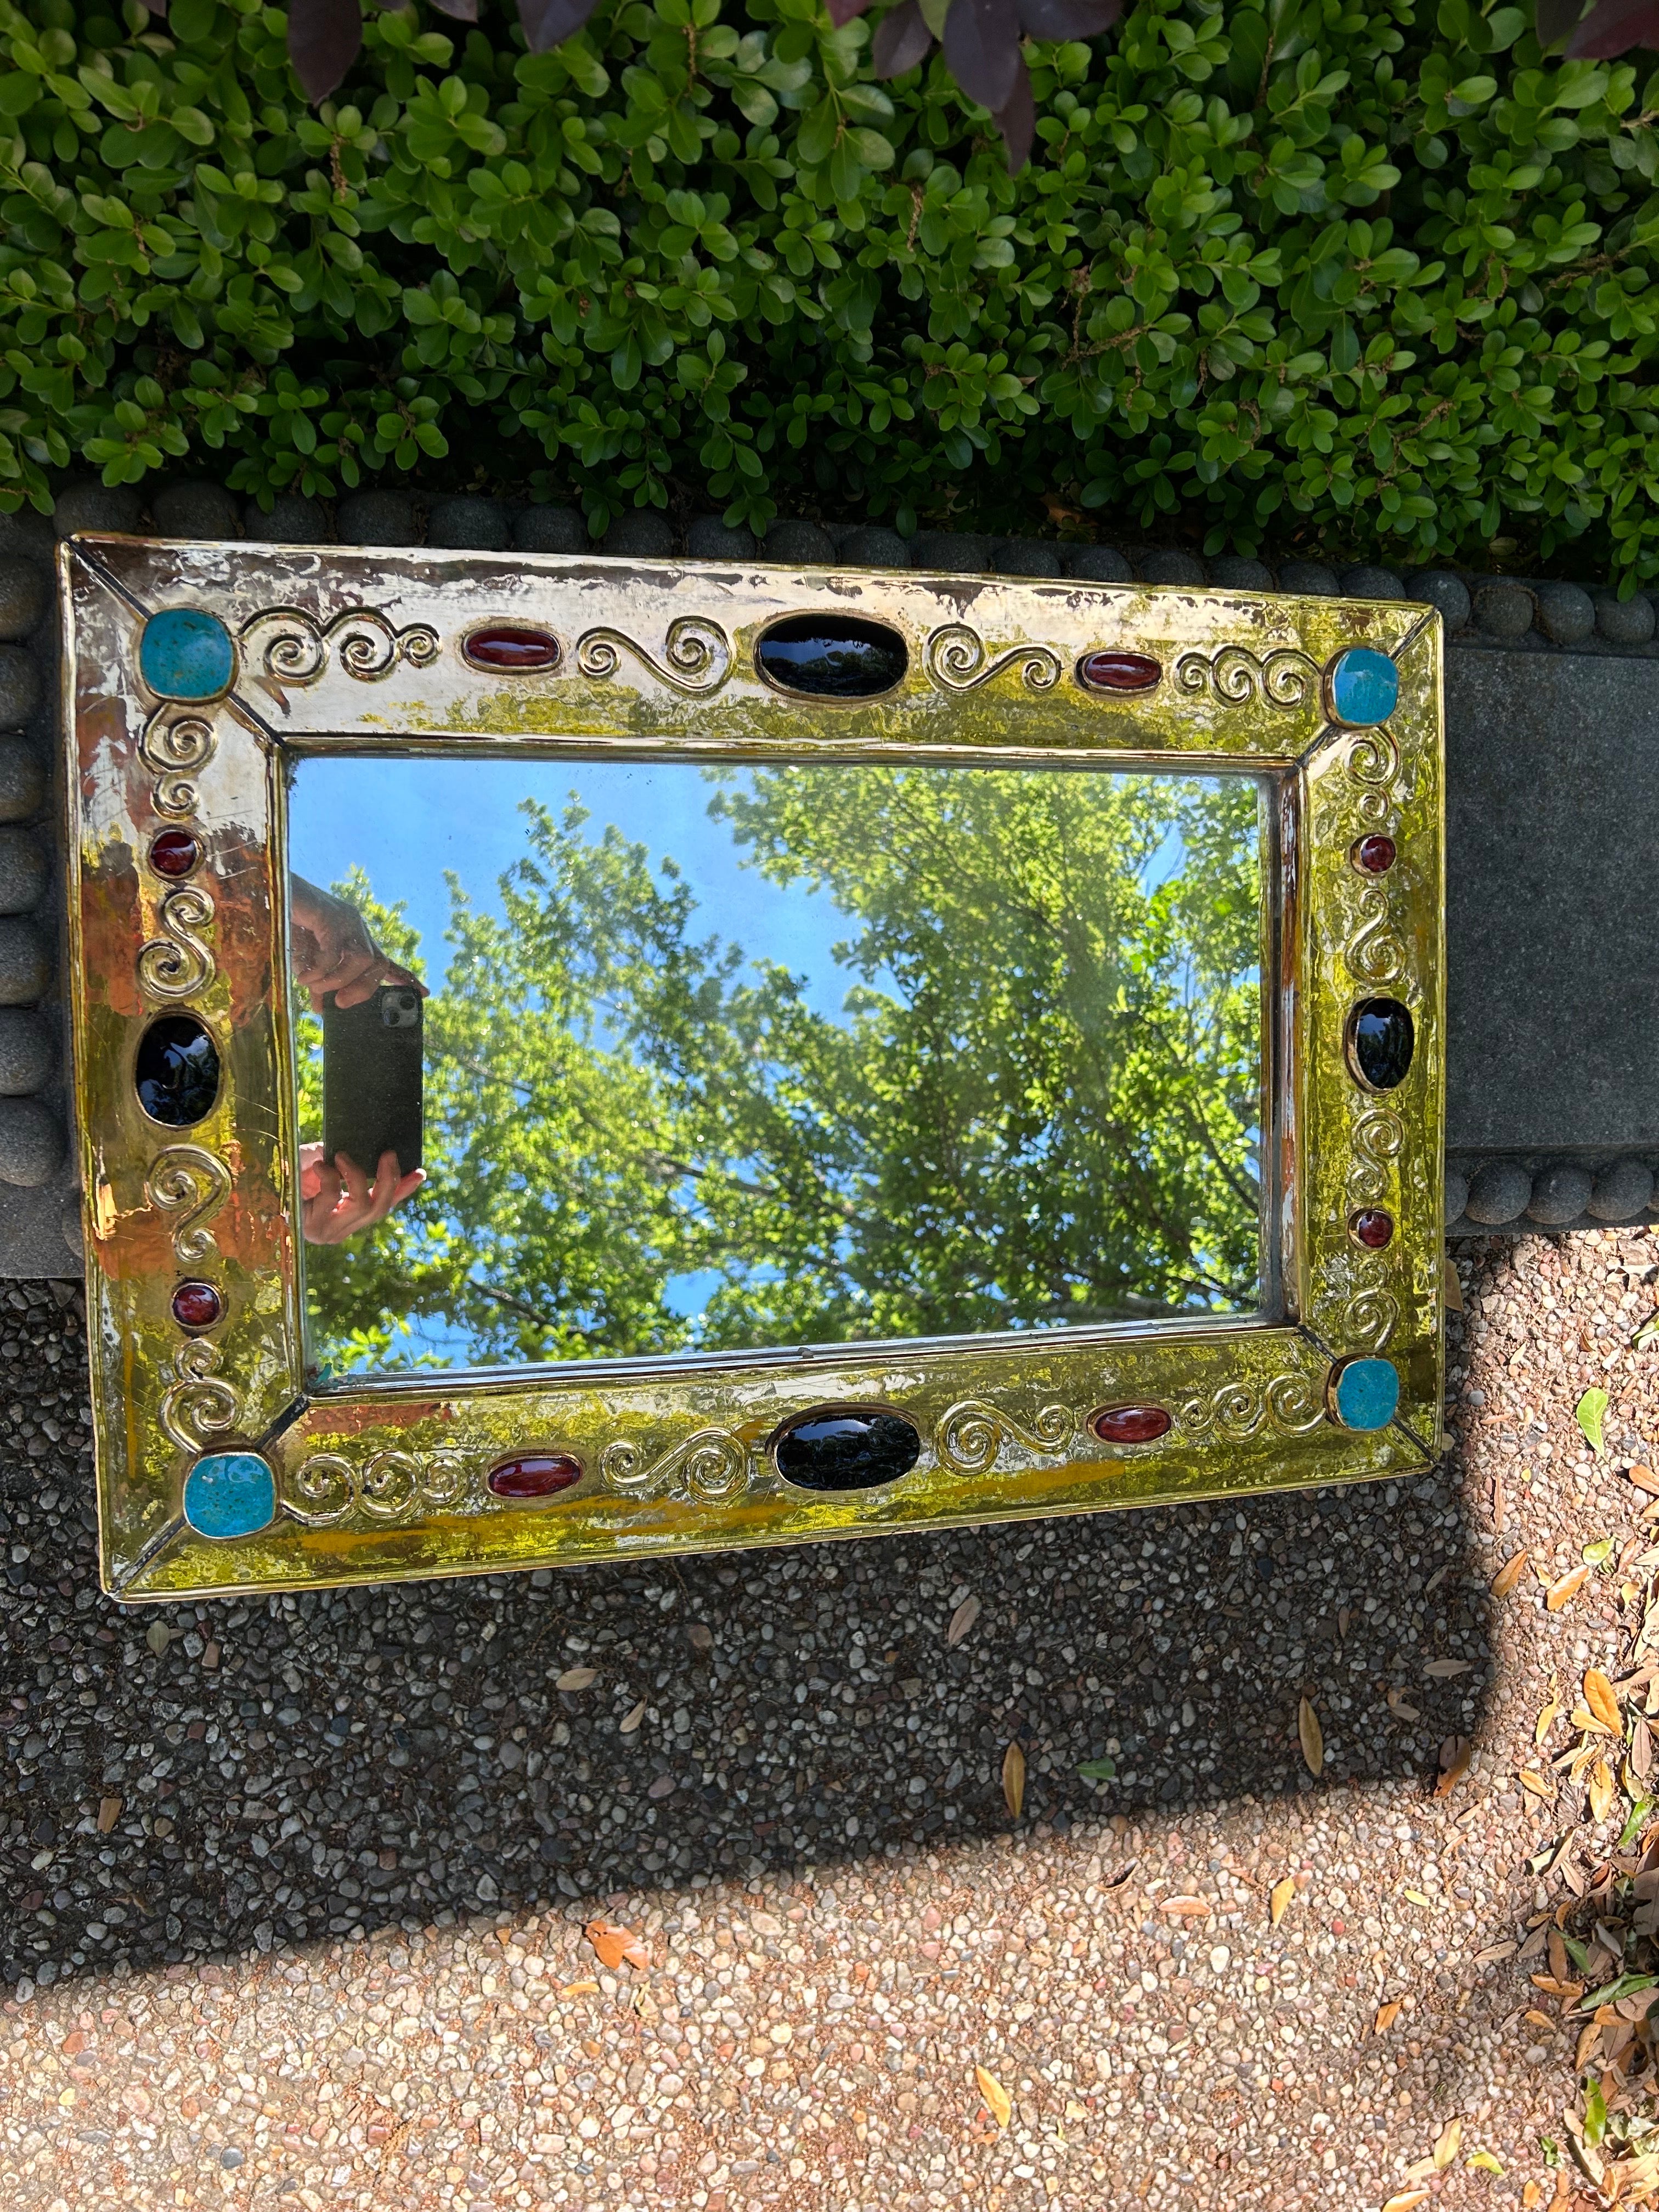 Large French Modern Ceramic Mirror Signed F. Lembo.
Francois Lembo mirror in gilt fired ceramic decorated with turquoise, red-orange and black inset jewels. This French mid century ceramic mirror is incised with F. Lembo signature on the back.
This